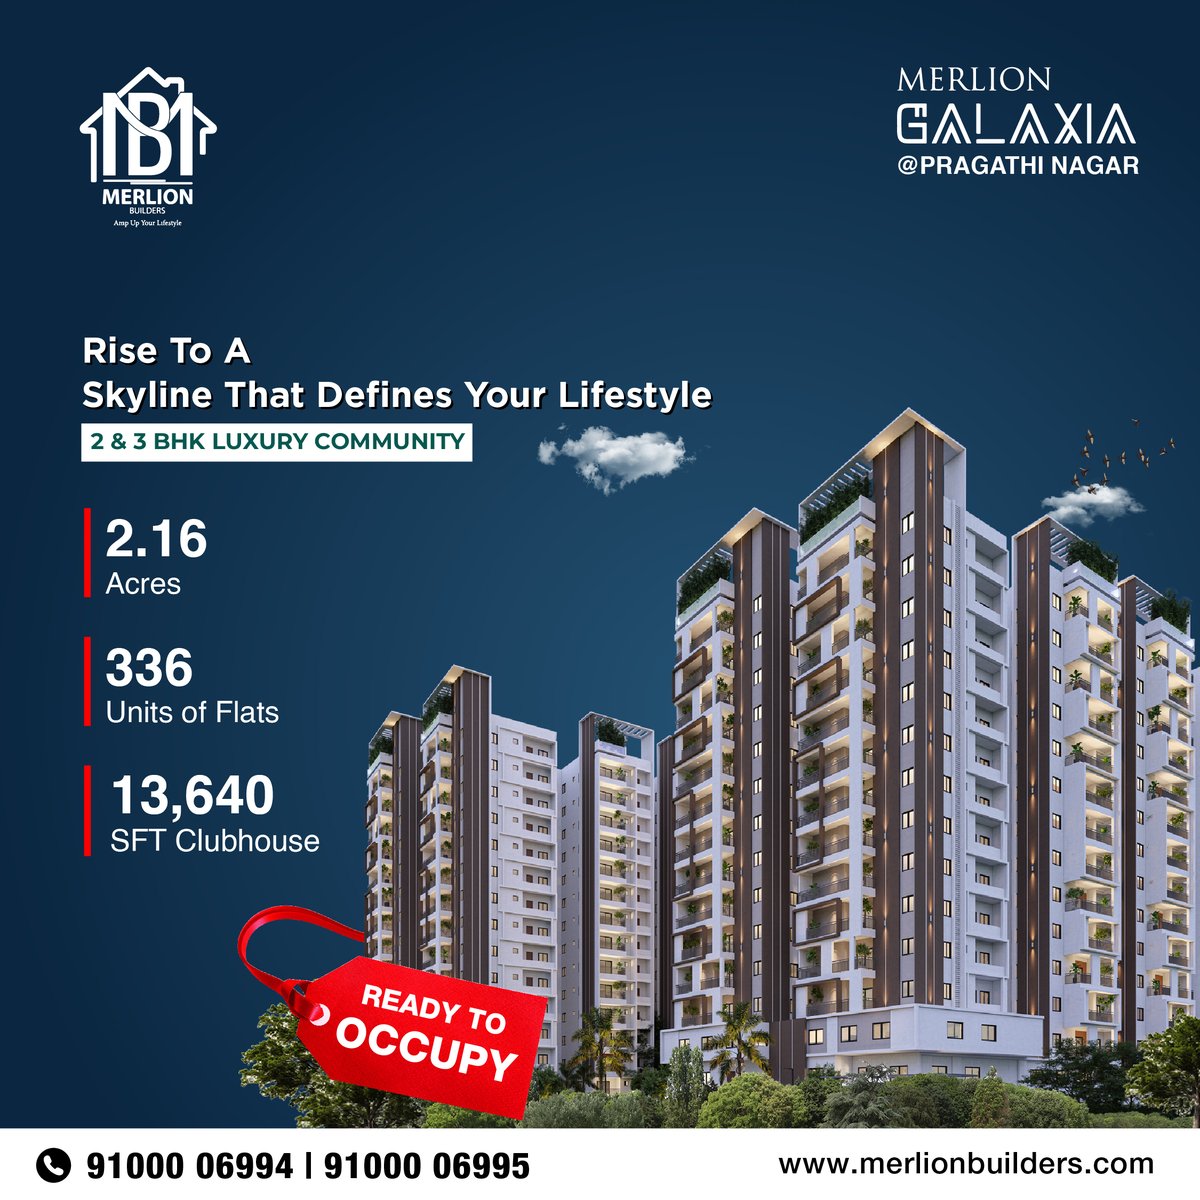 Step into the world of high living, where modern amenities and seamless connectivity allow you to thrive in prosperity. #merlionbuilders #pragathinagar #flatsforsale #apartmentsforsale #highrisebuildings #luxuryliving #luxuryapartmentsforsale #apartmentsale #apartmentforsale